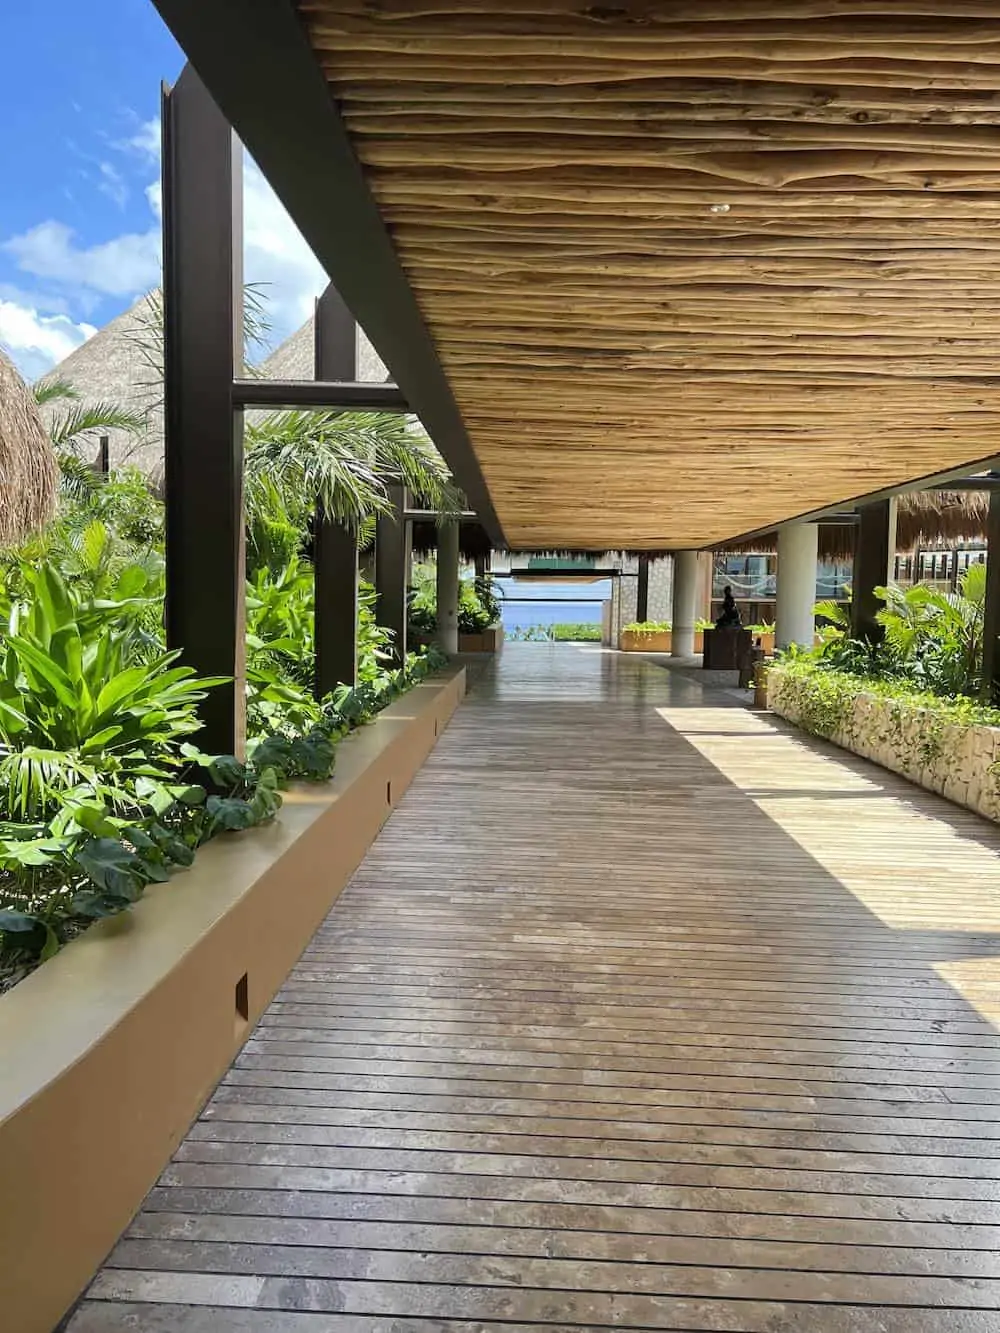 Walkway connecting the buildings at a resort in Mexico.